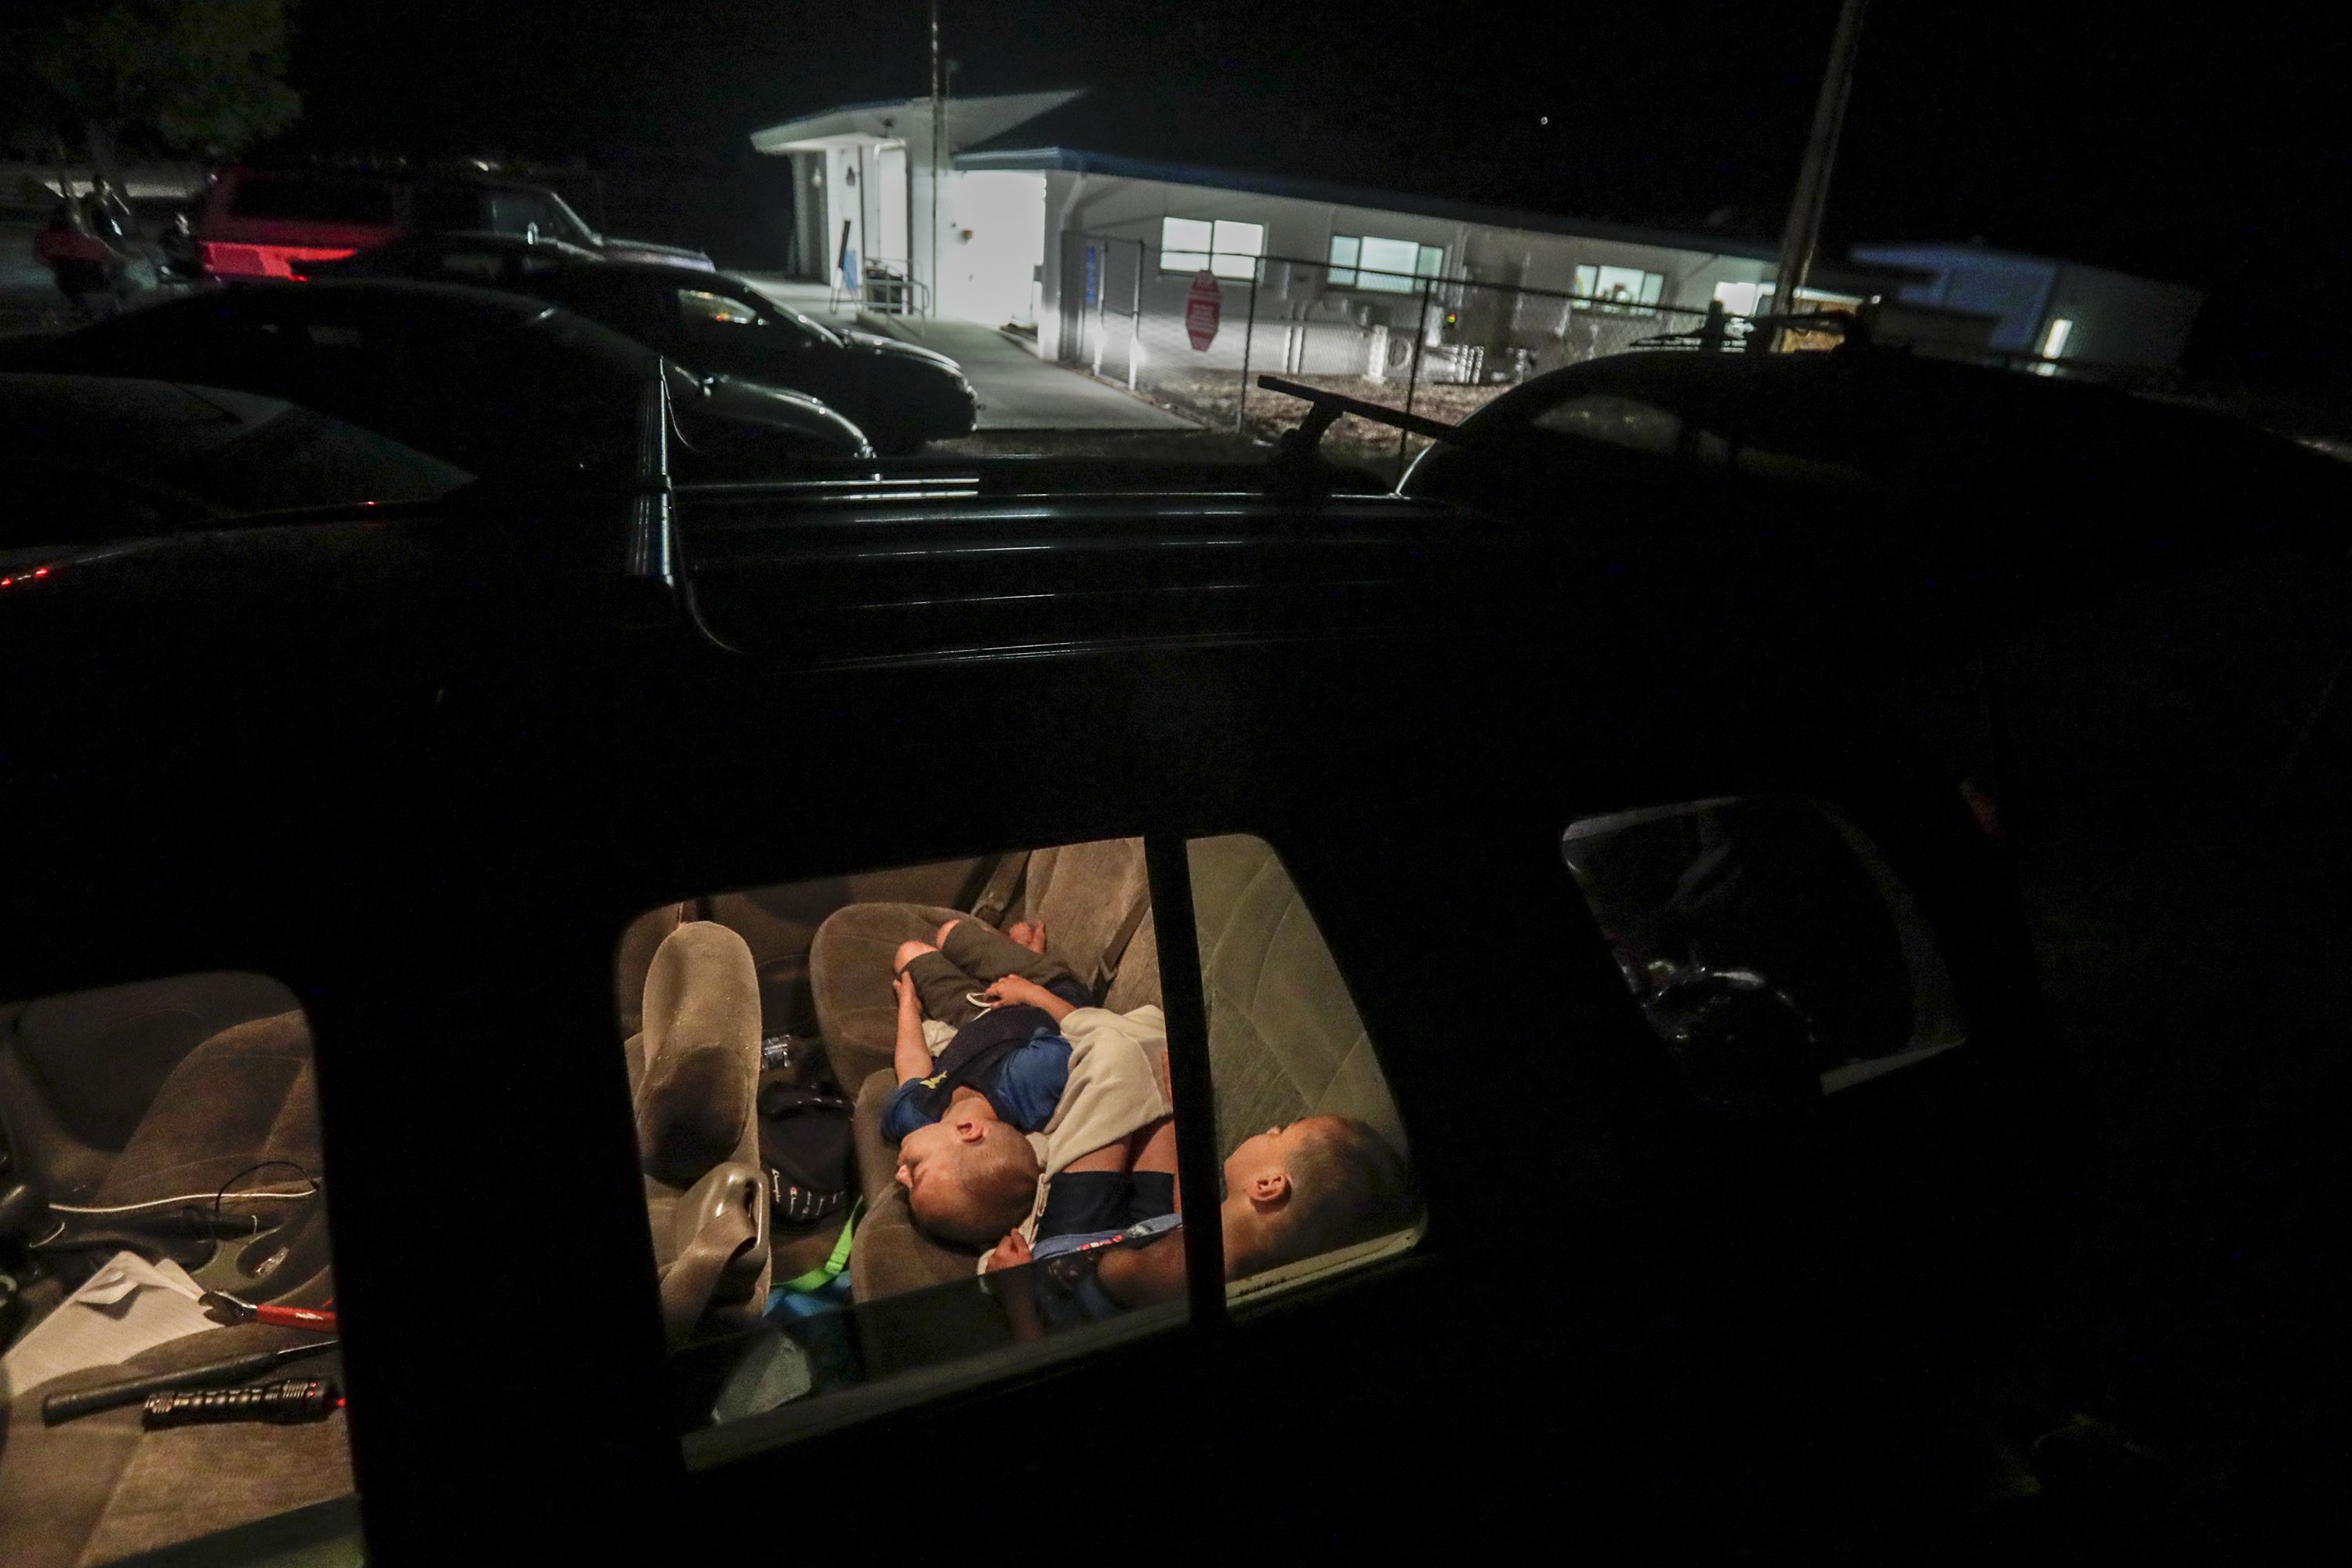 This image shows infants and young children sleeping in the back of a car in a parking lot at night.